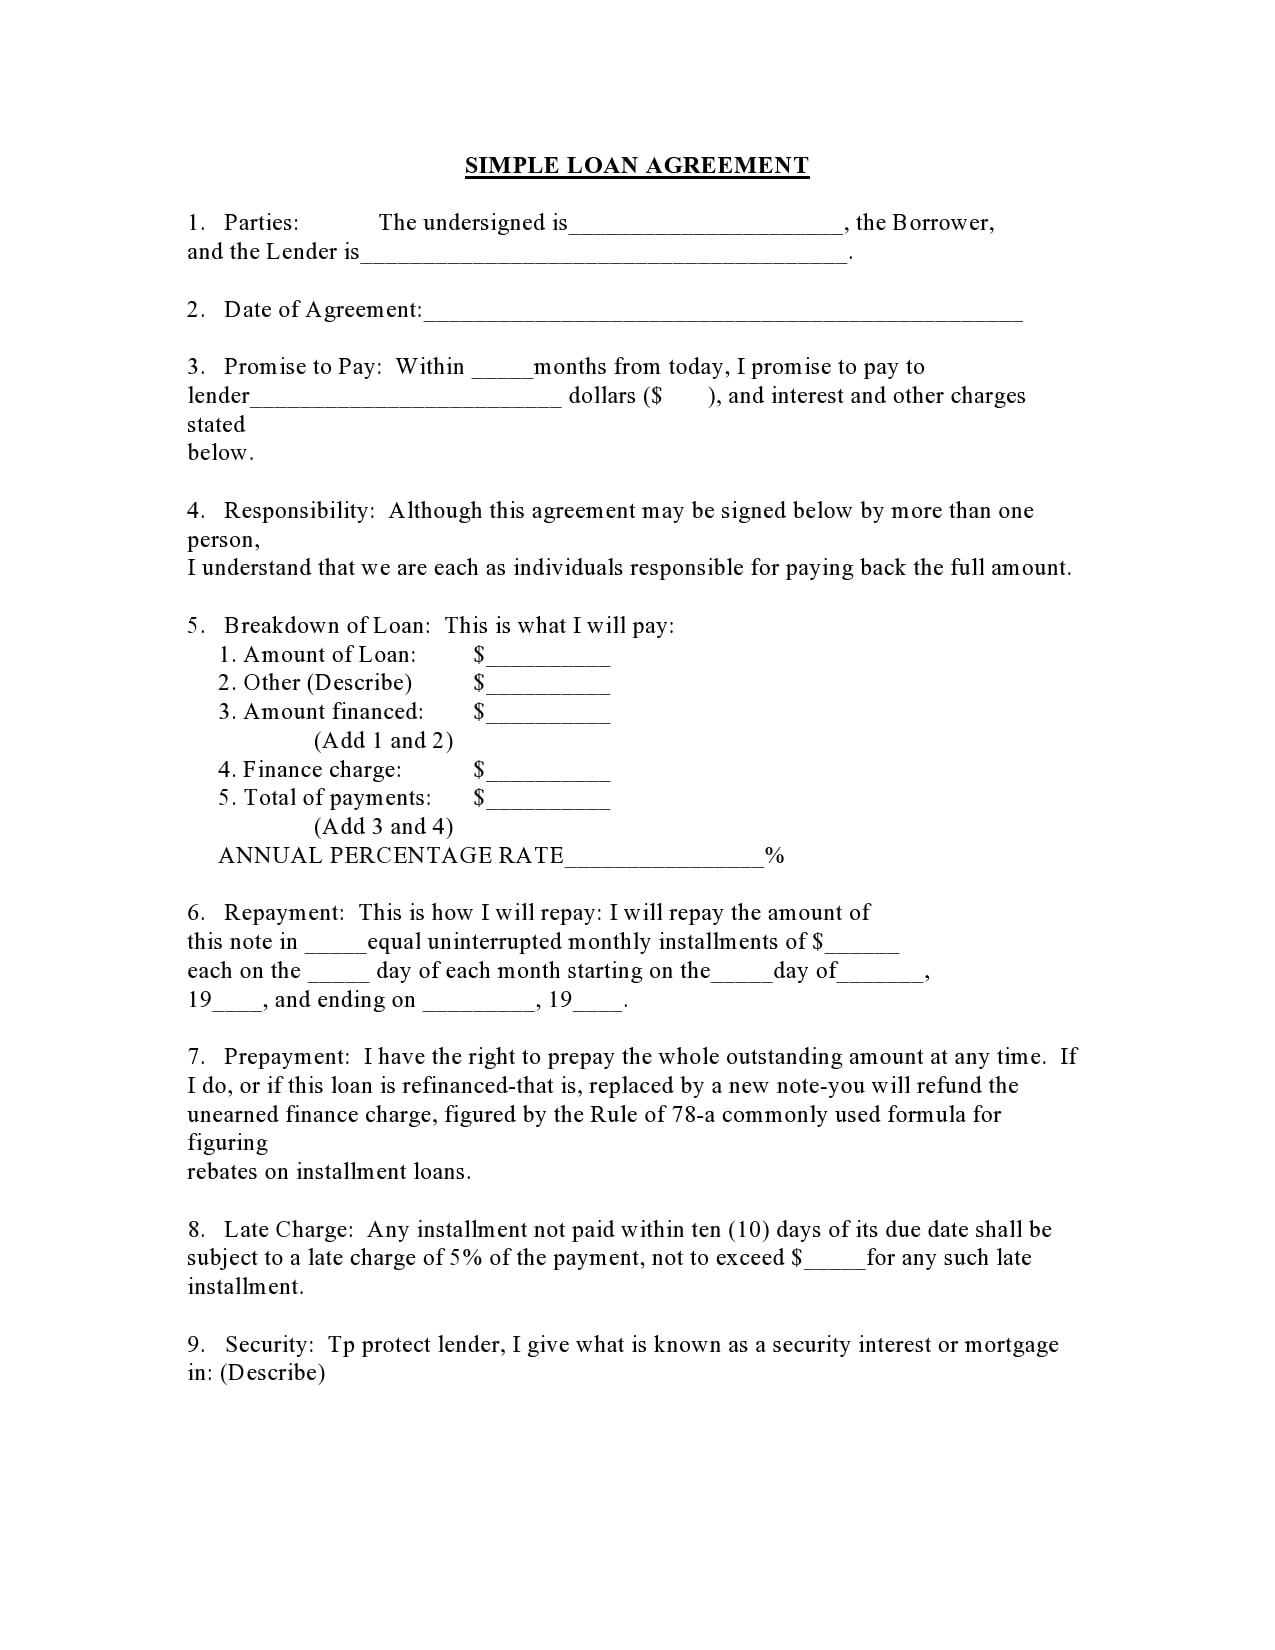 22 Simple Family Loan Agreement Templates (22% Free) Intended For line of credit loan agreement template